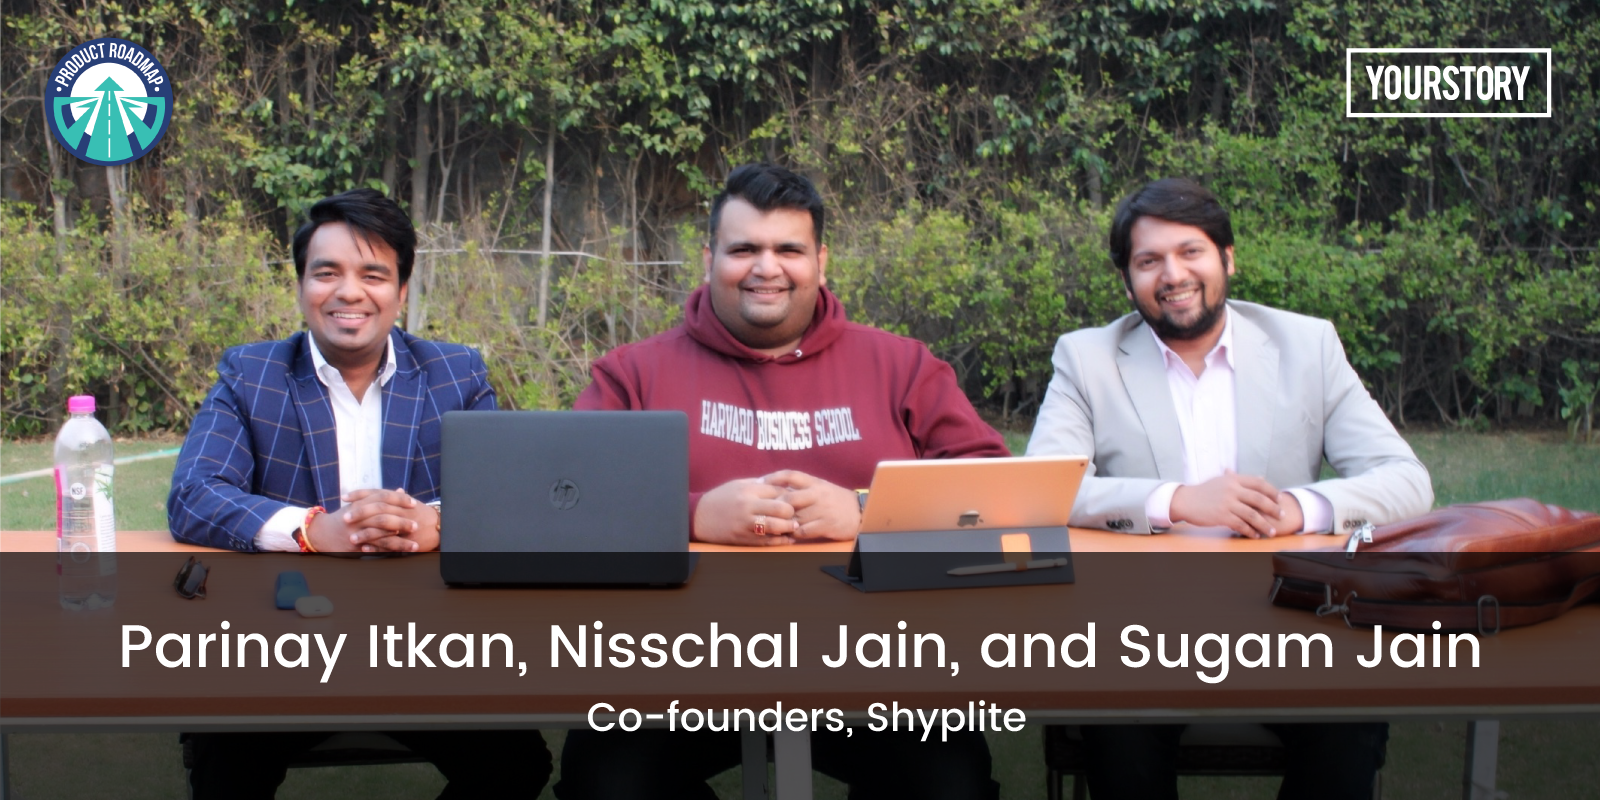 [Product Roadmap] Started with an aim to cut logistics onboarding time, Shyplite now touches over 27,000 pin codes